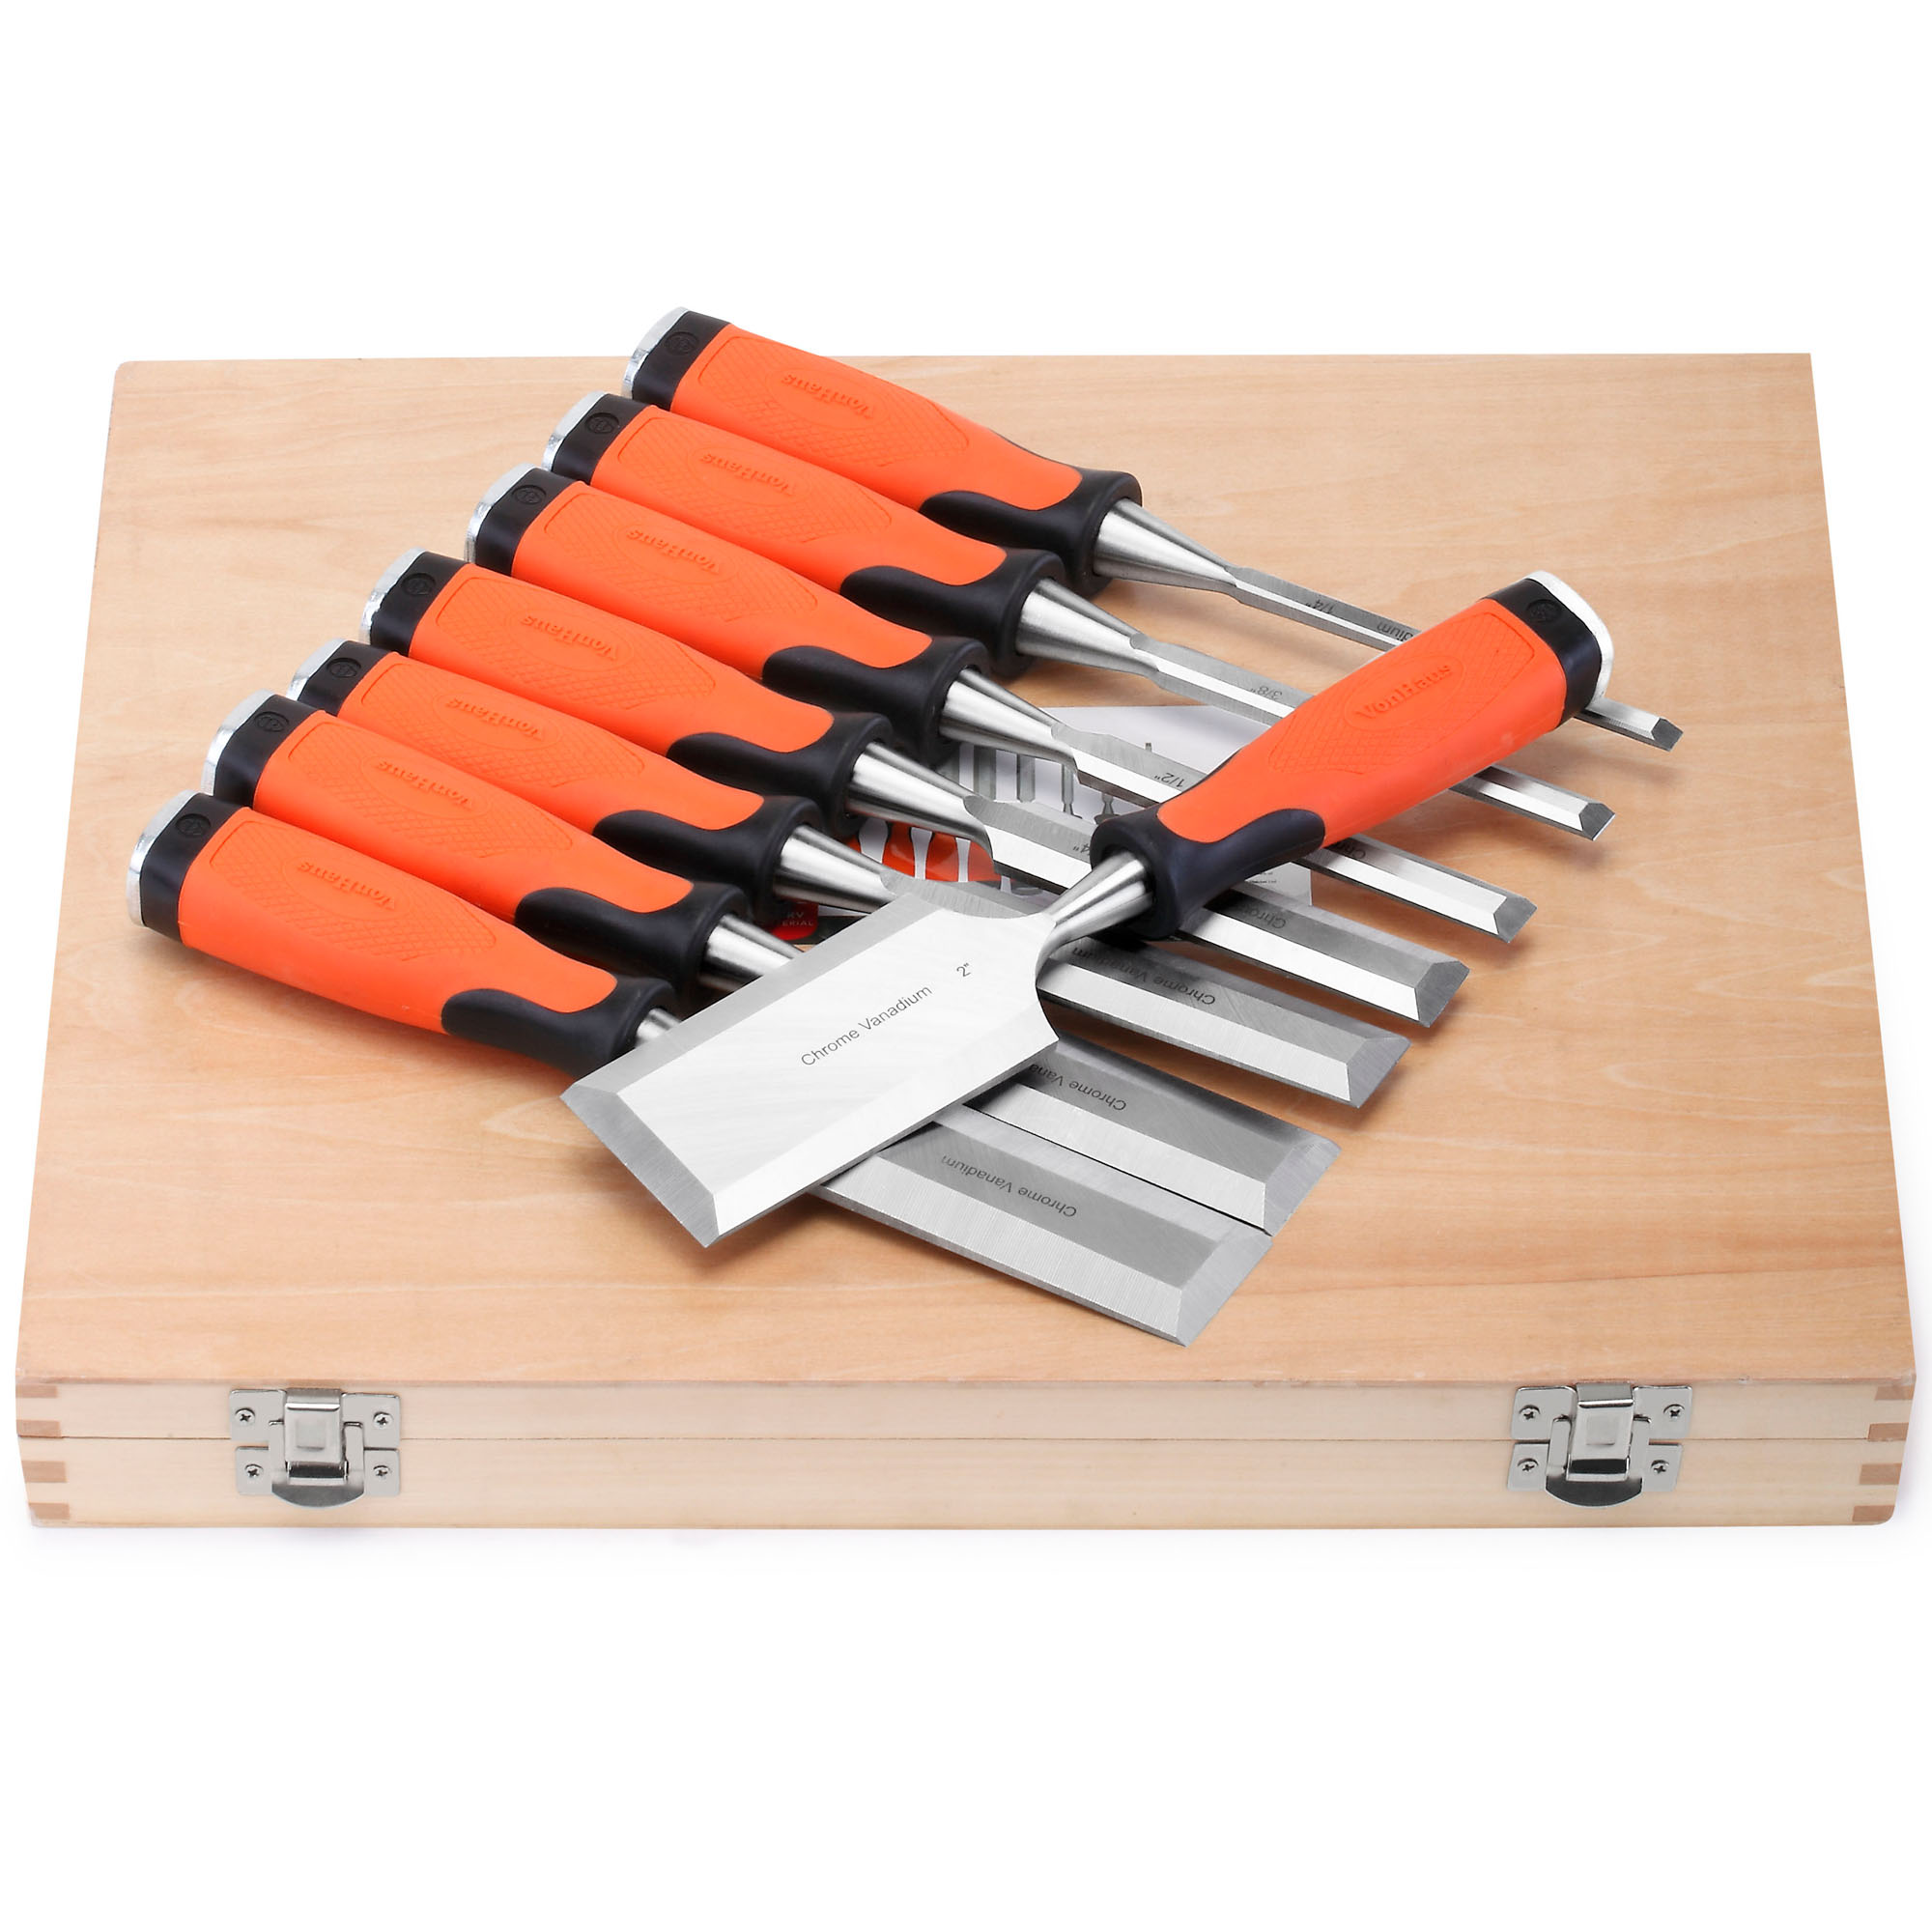 VonHaus 10 Piece Wood Working Chisel Set with Honing Guide 